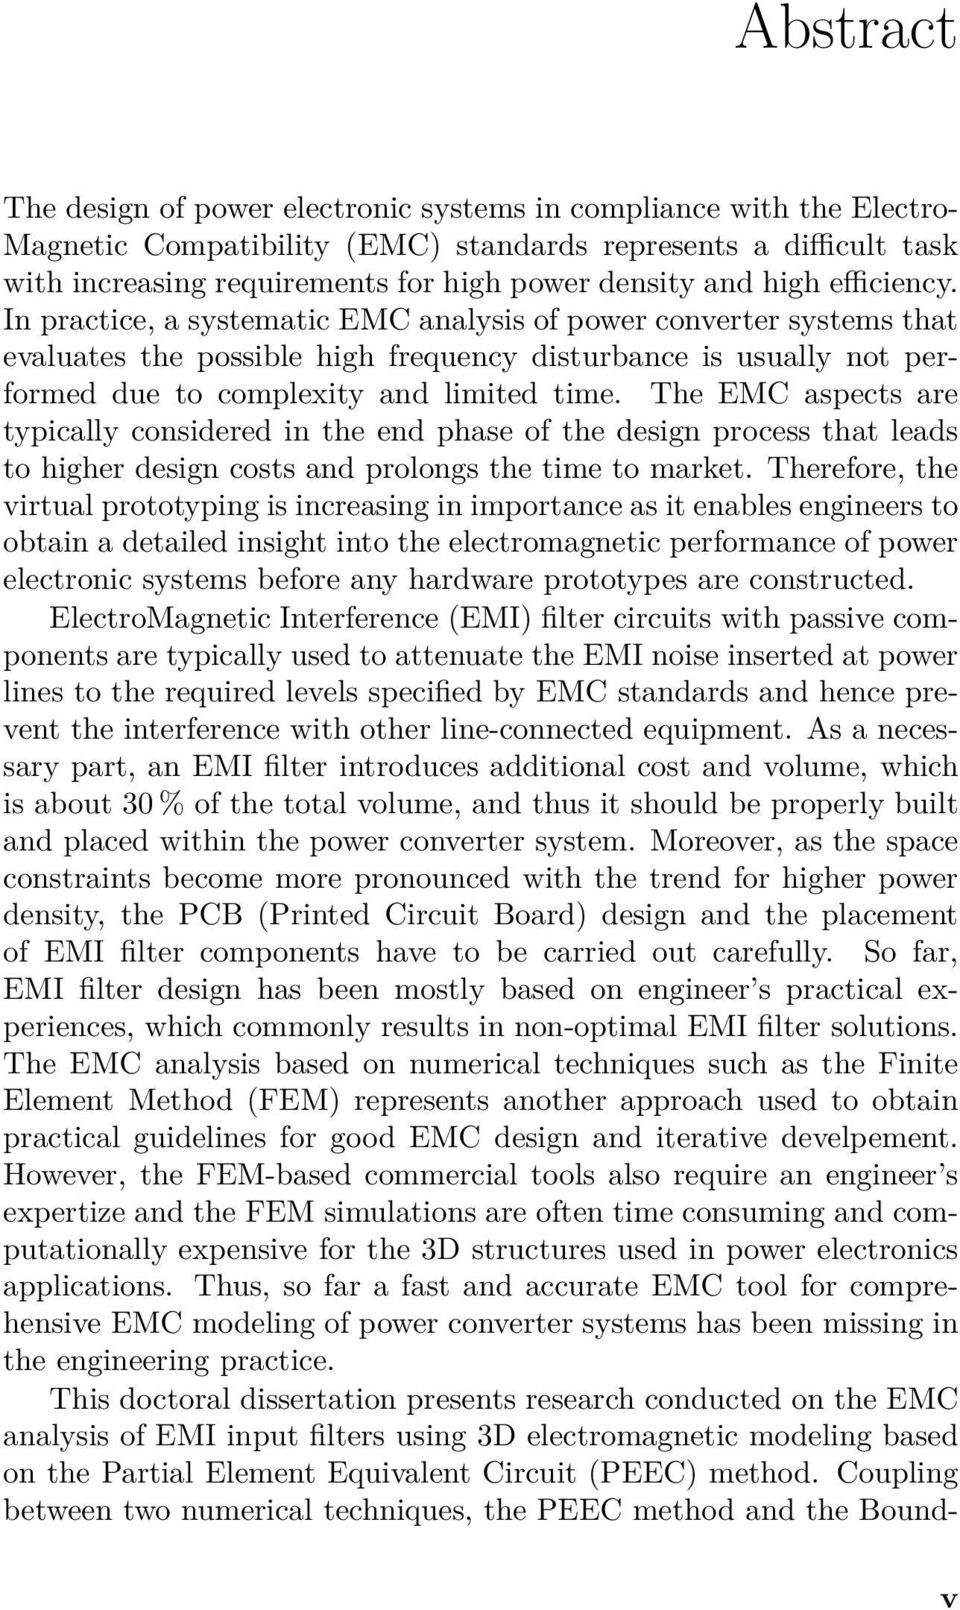 In practice, a systematic EMC analysis of power converter systems that evaluates the possible high frequency disturbance is usually not performed due to complexity and limited time.